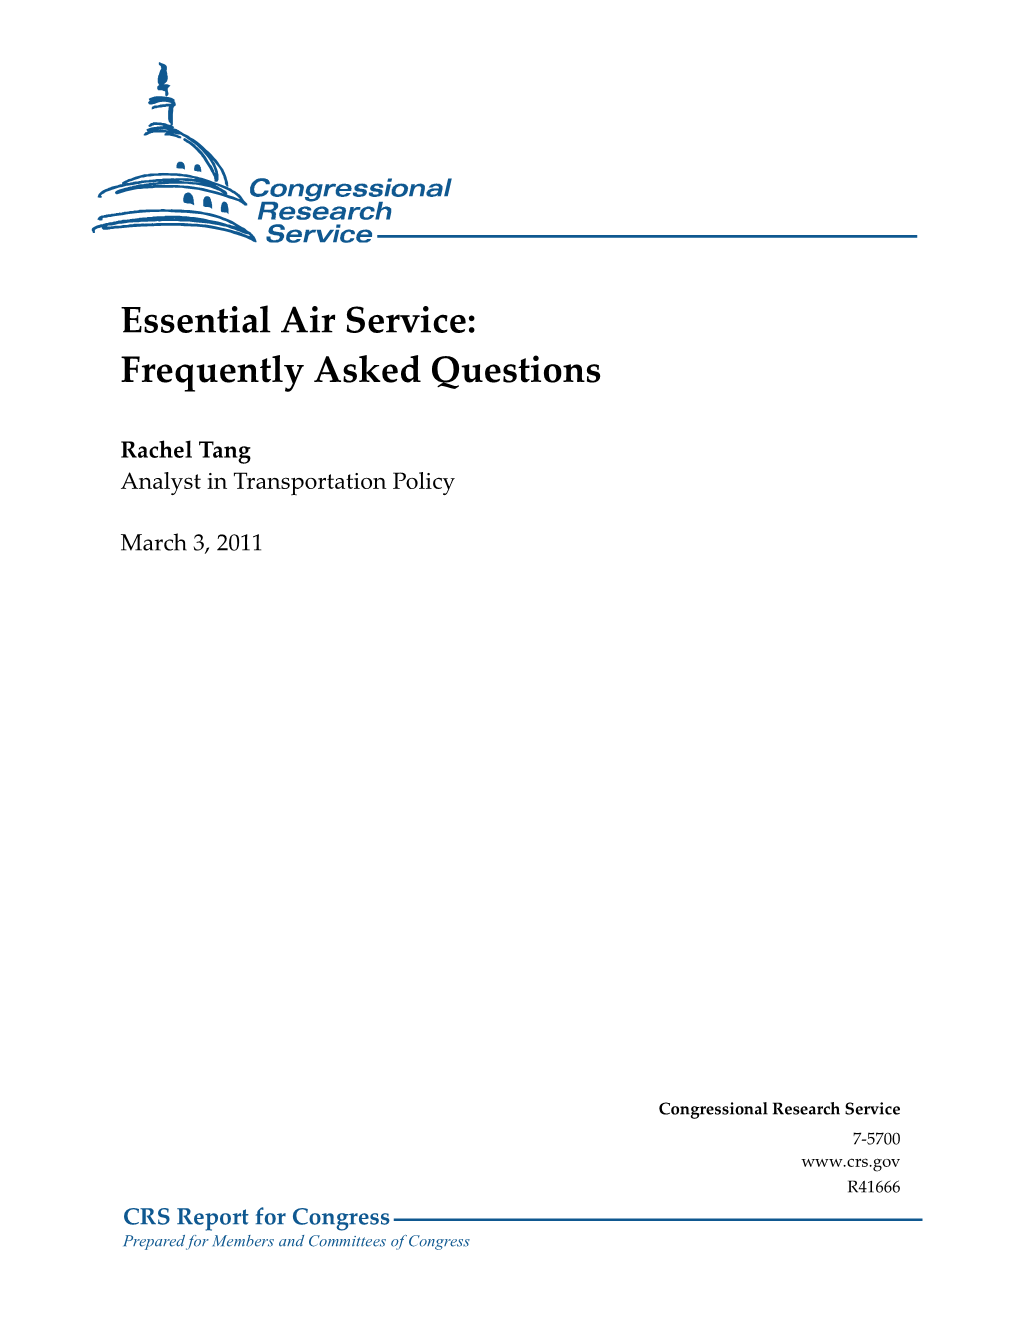 Essential Air Service: Frequently Asked Questions